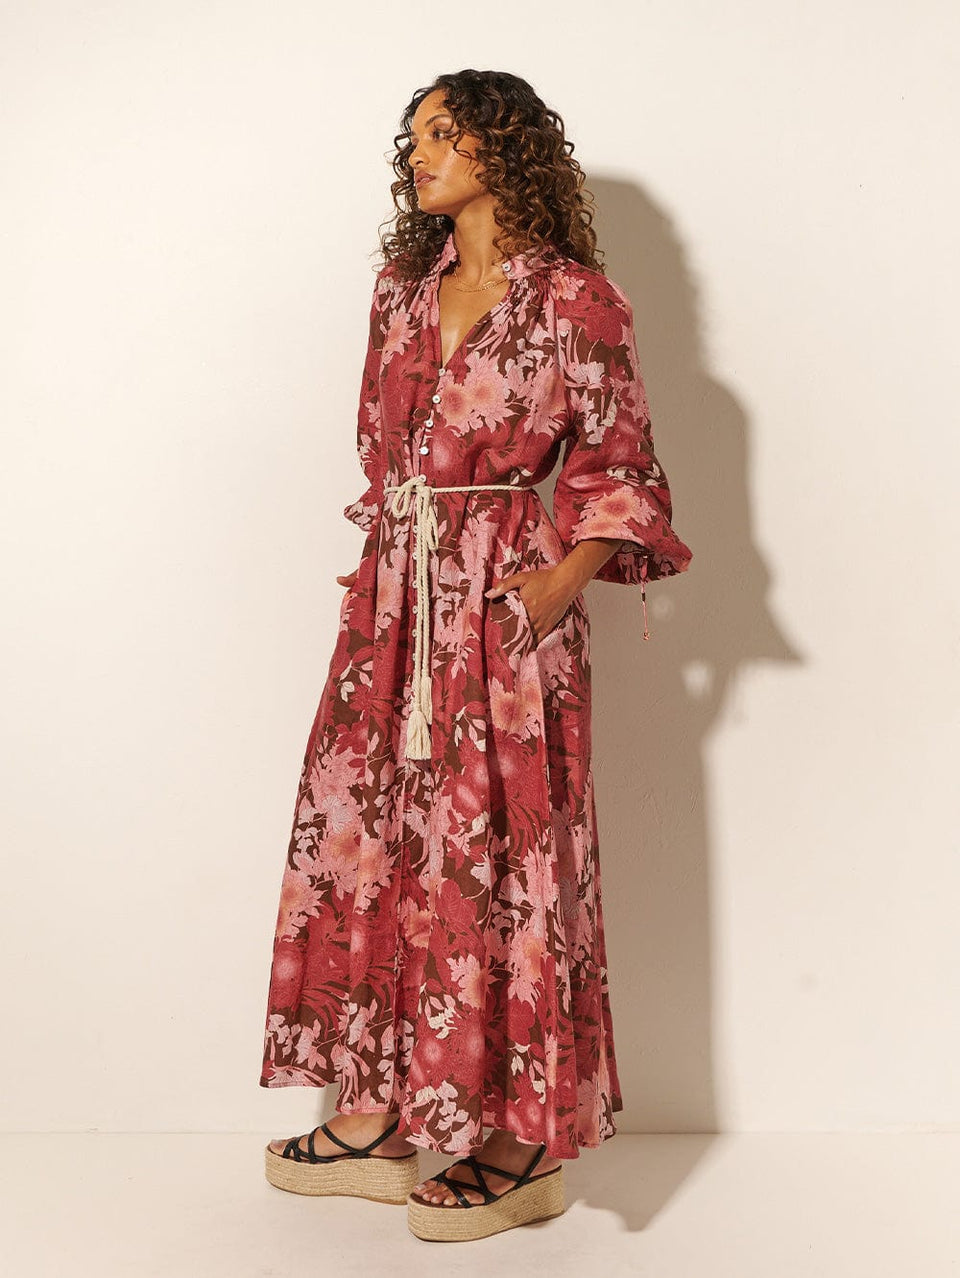 Close-up: Studio model wears KIVARI Hacienda Maxi Dress: A red, pink and brown floral dress with a shirred collar, button-through front, waist ties and full-length sleeves, crafted from sustainable LENZING Viscose Crepe.